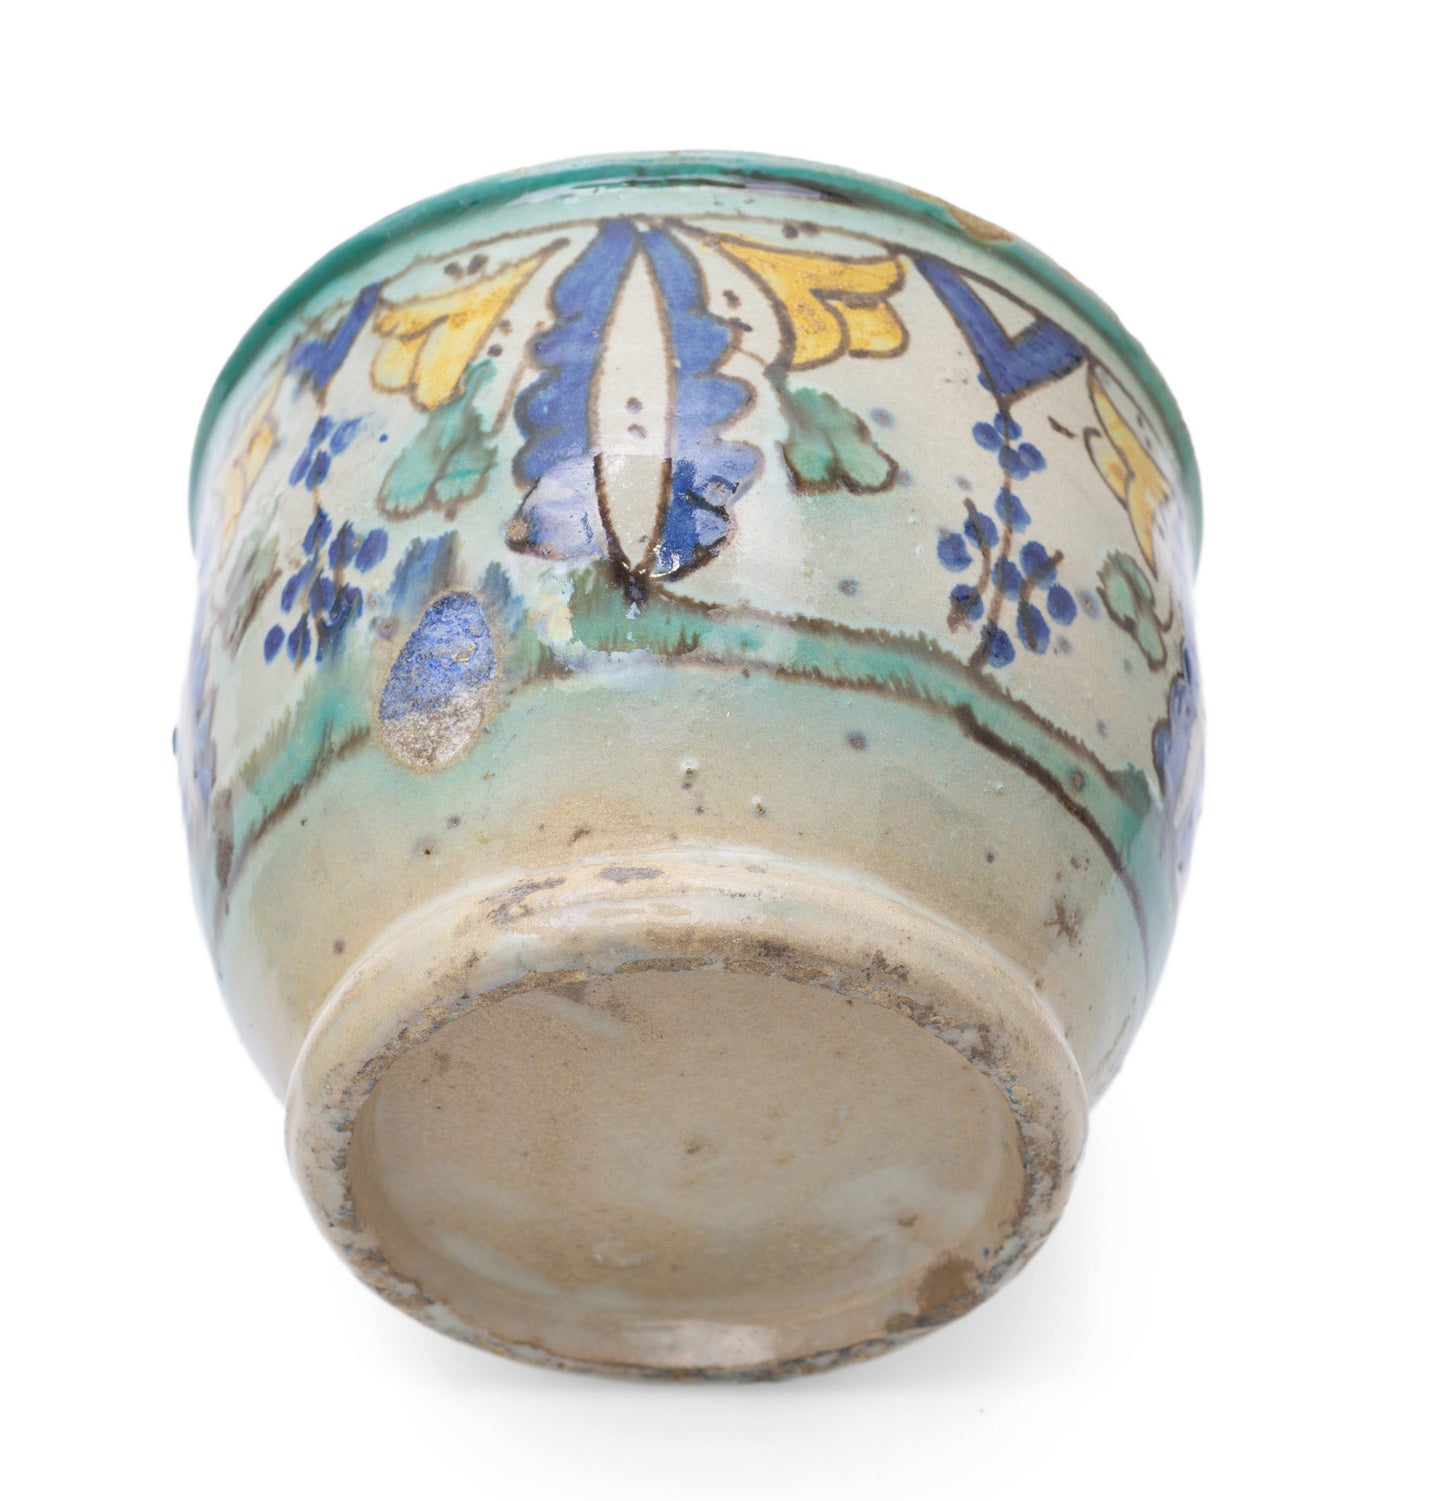 Antique Colonial Indian Multan / Sindh Pottery Storage Jar in Polychrome Glaze (Code 2516)